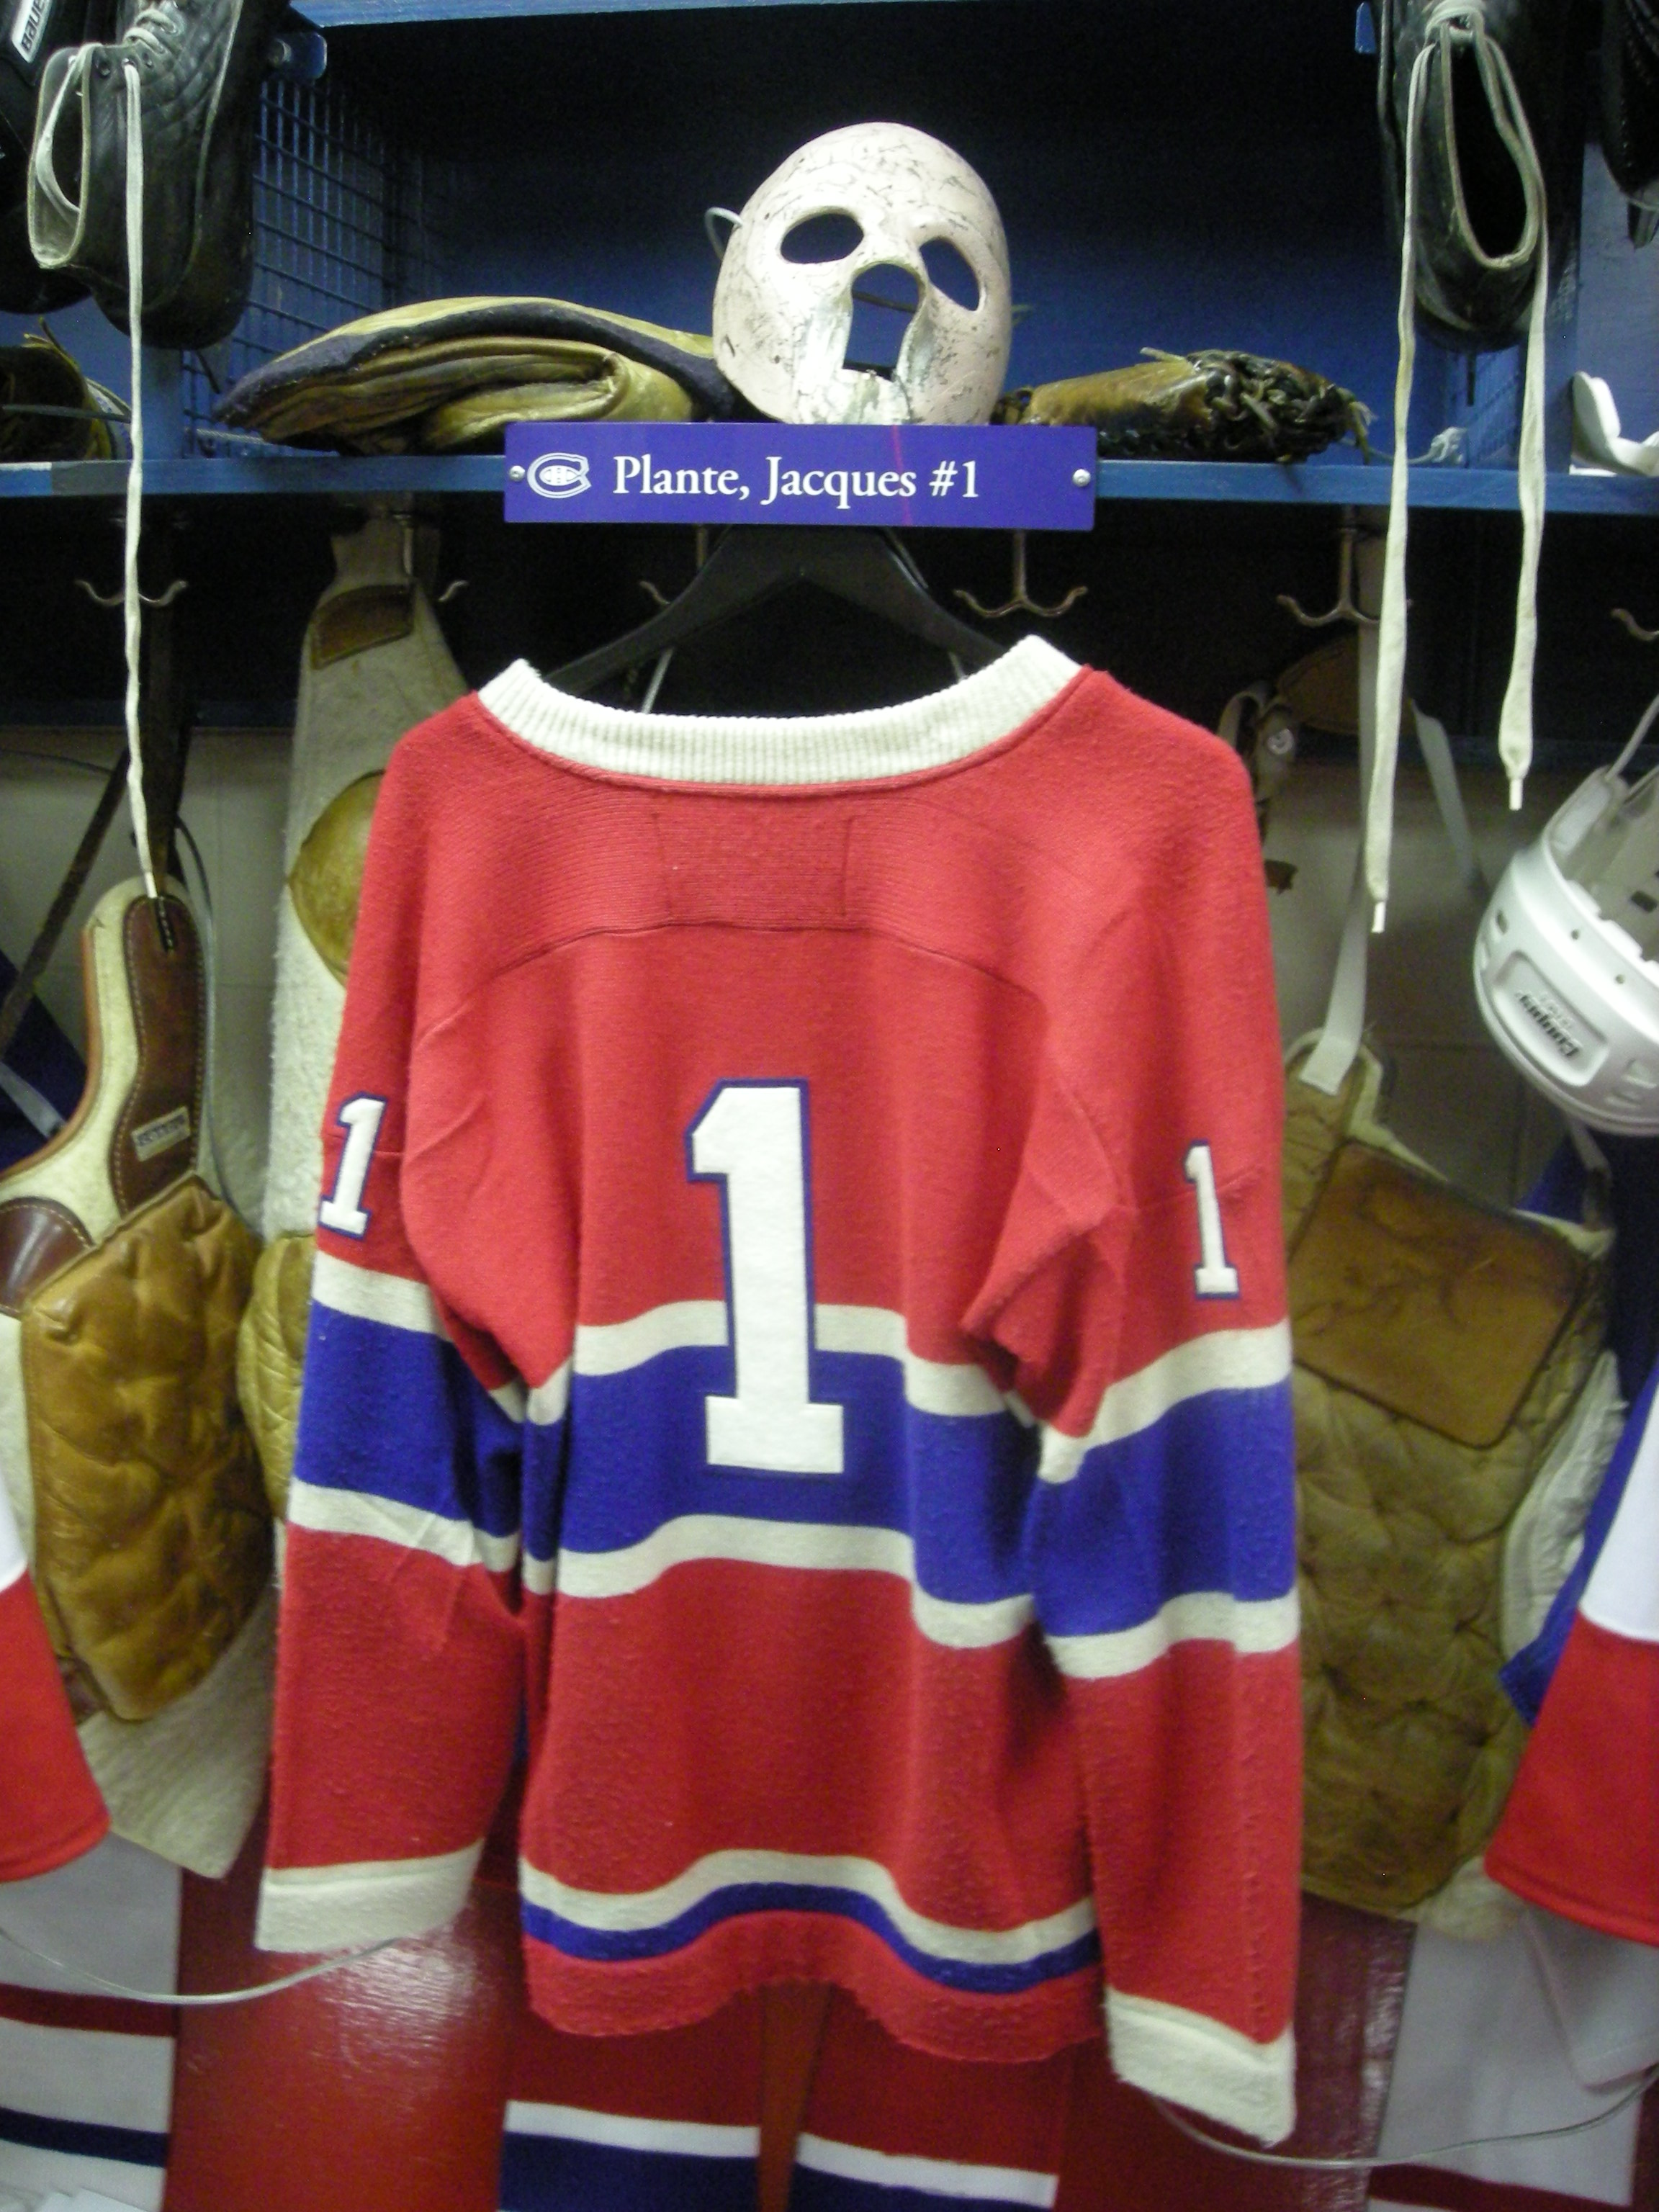 jacques plante jersey number